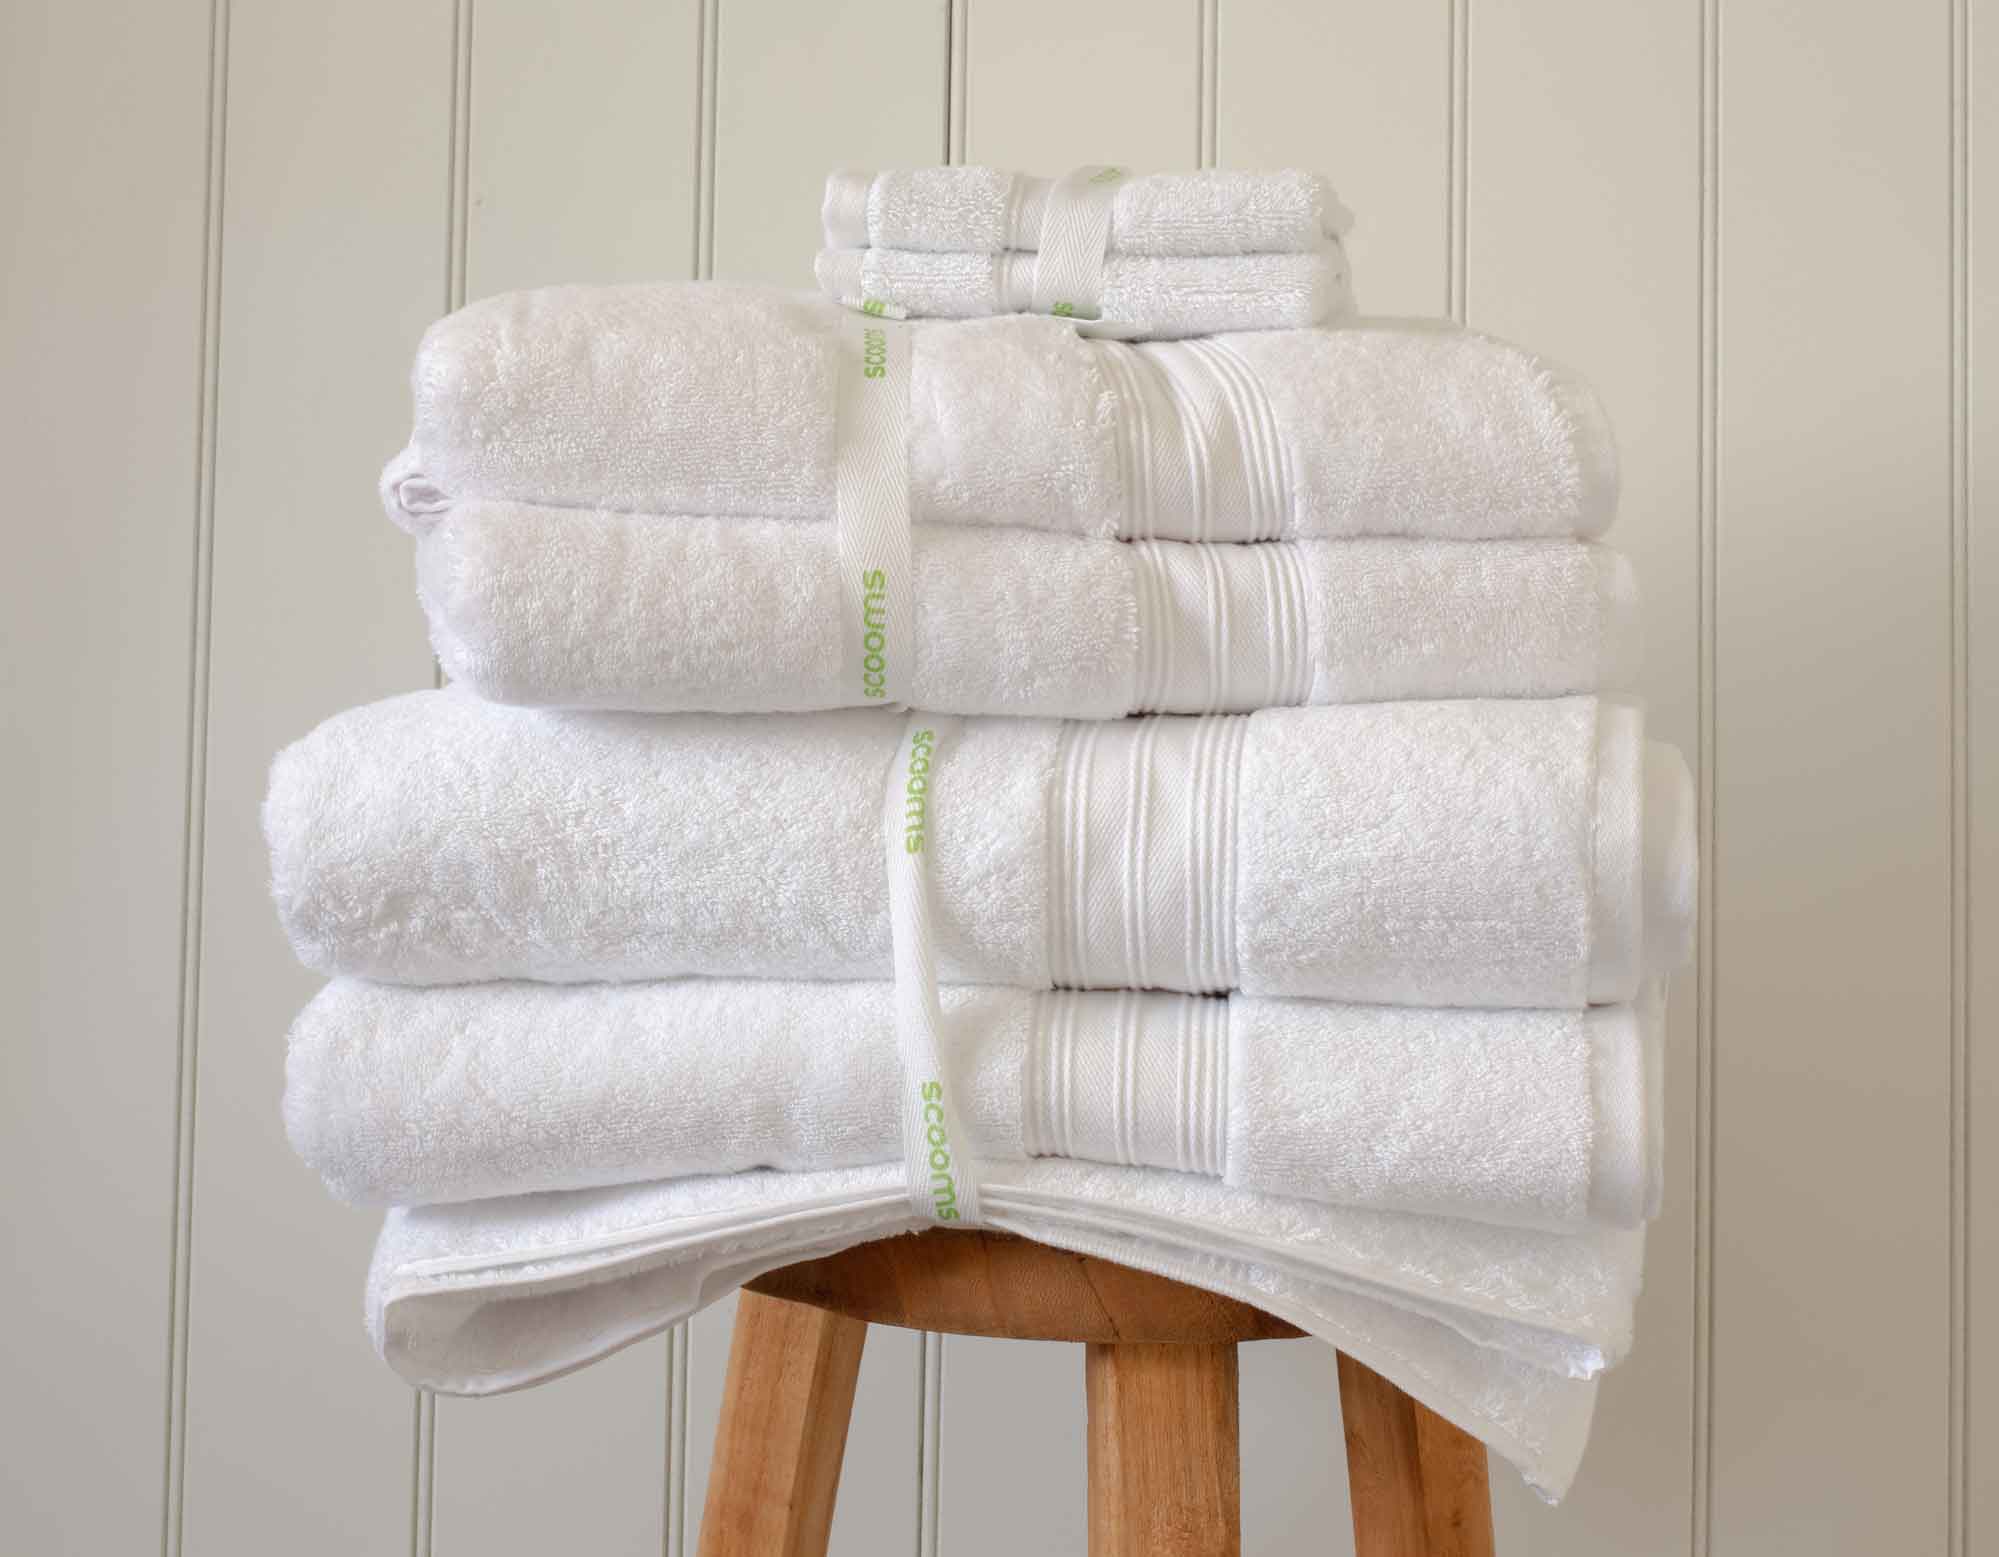 White Egyptian cotton face cloths and towels in pile